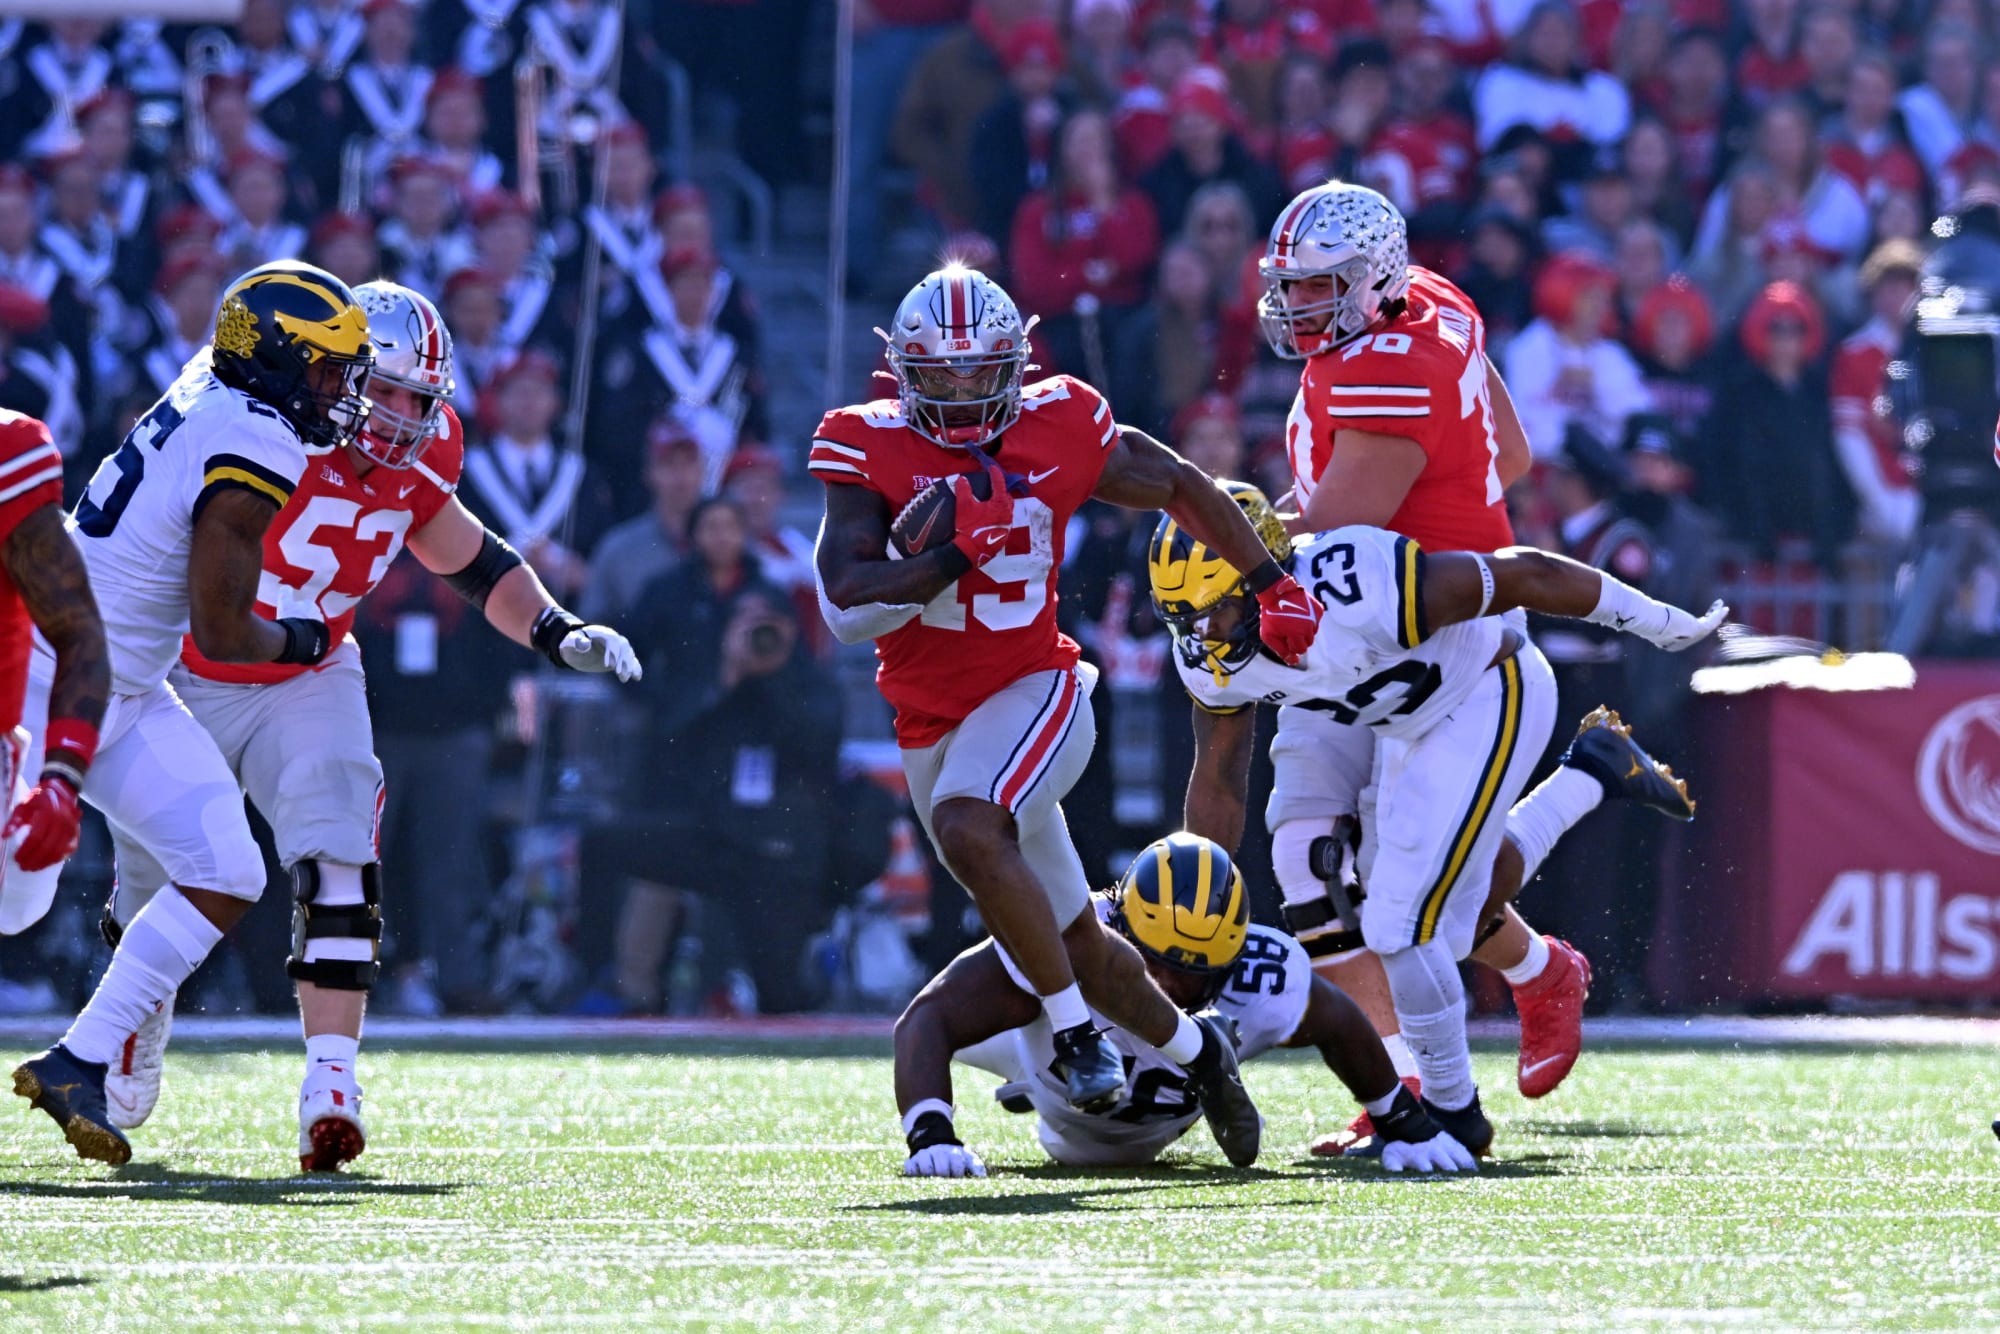 Where will Ohio State Football be ranked in final CFP rankings?